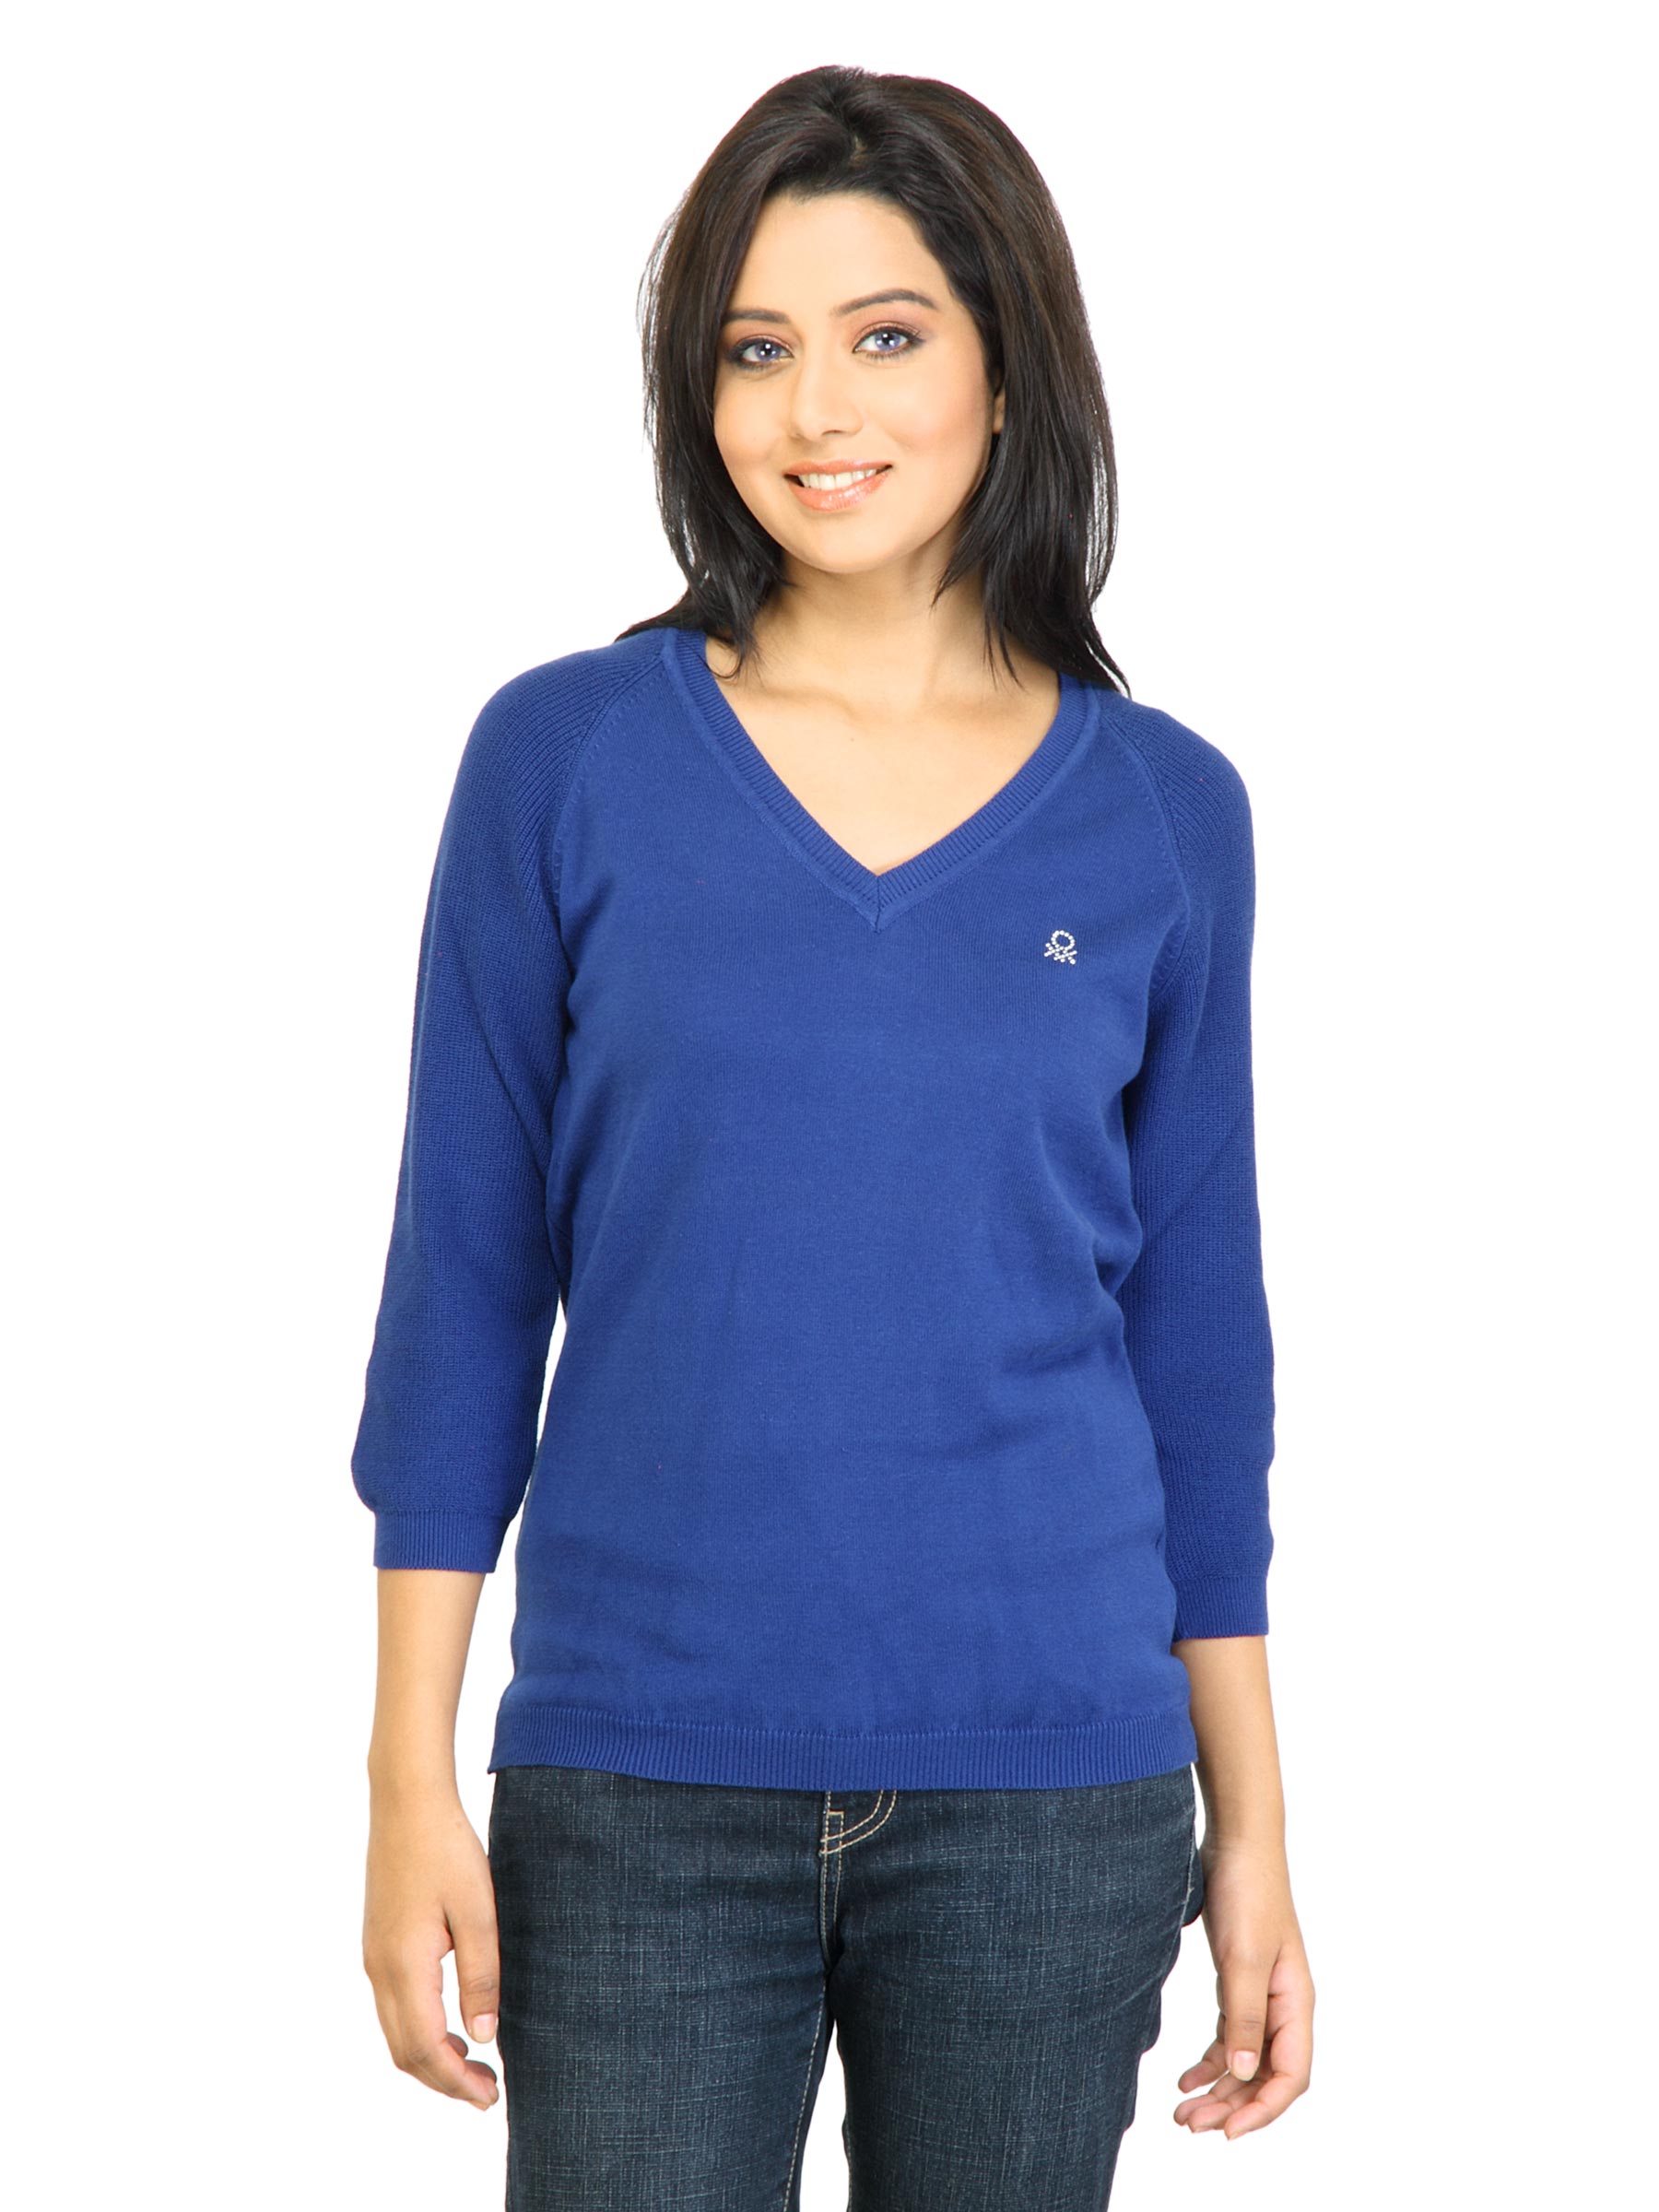 United Colors of Benetton Women Solid Blue Sweater